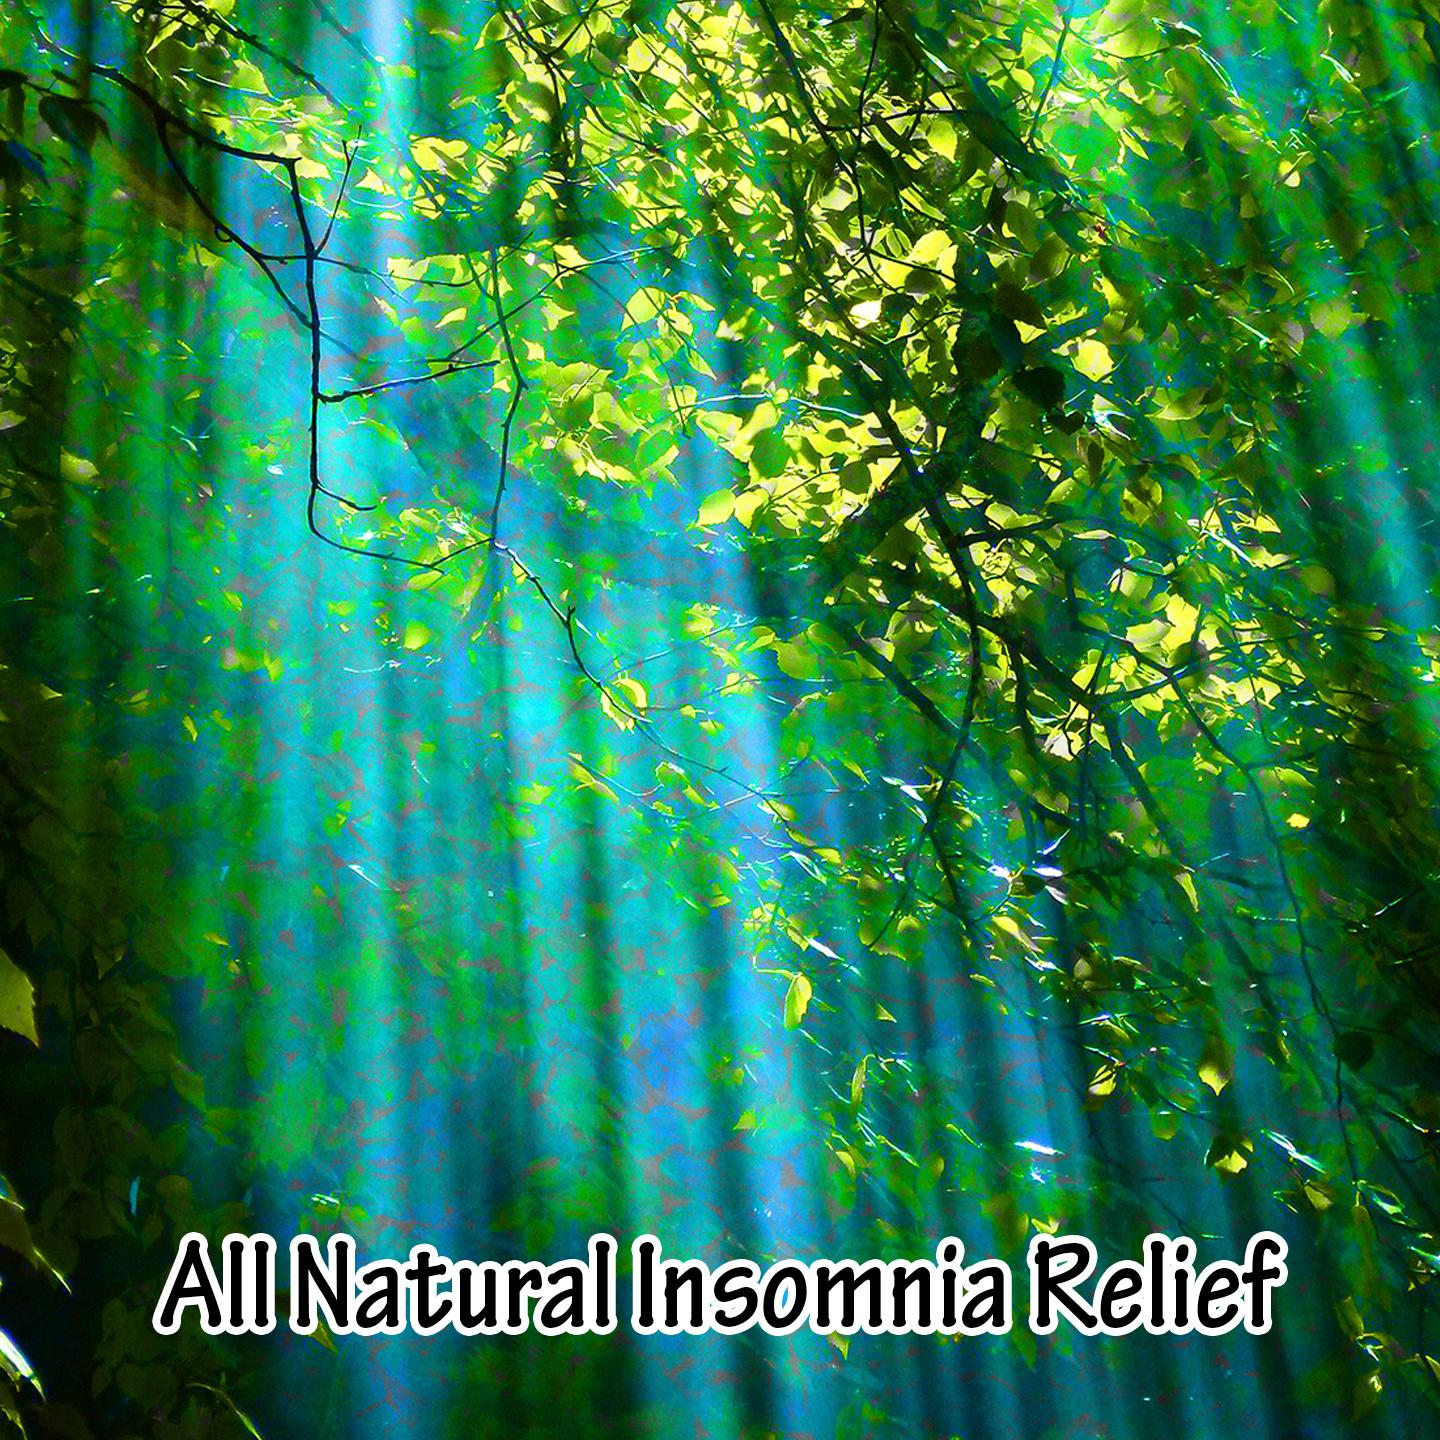 All Natural Insomnia Relief